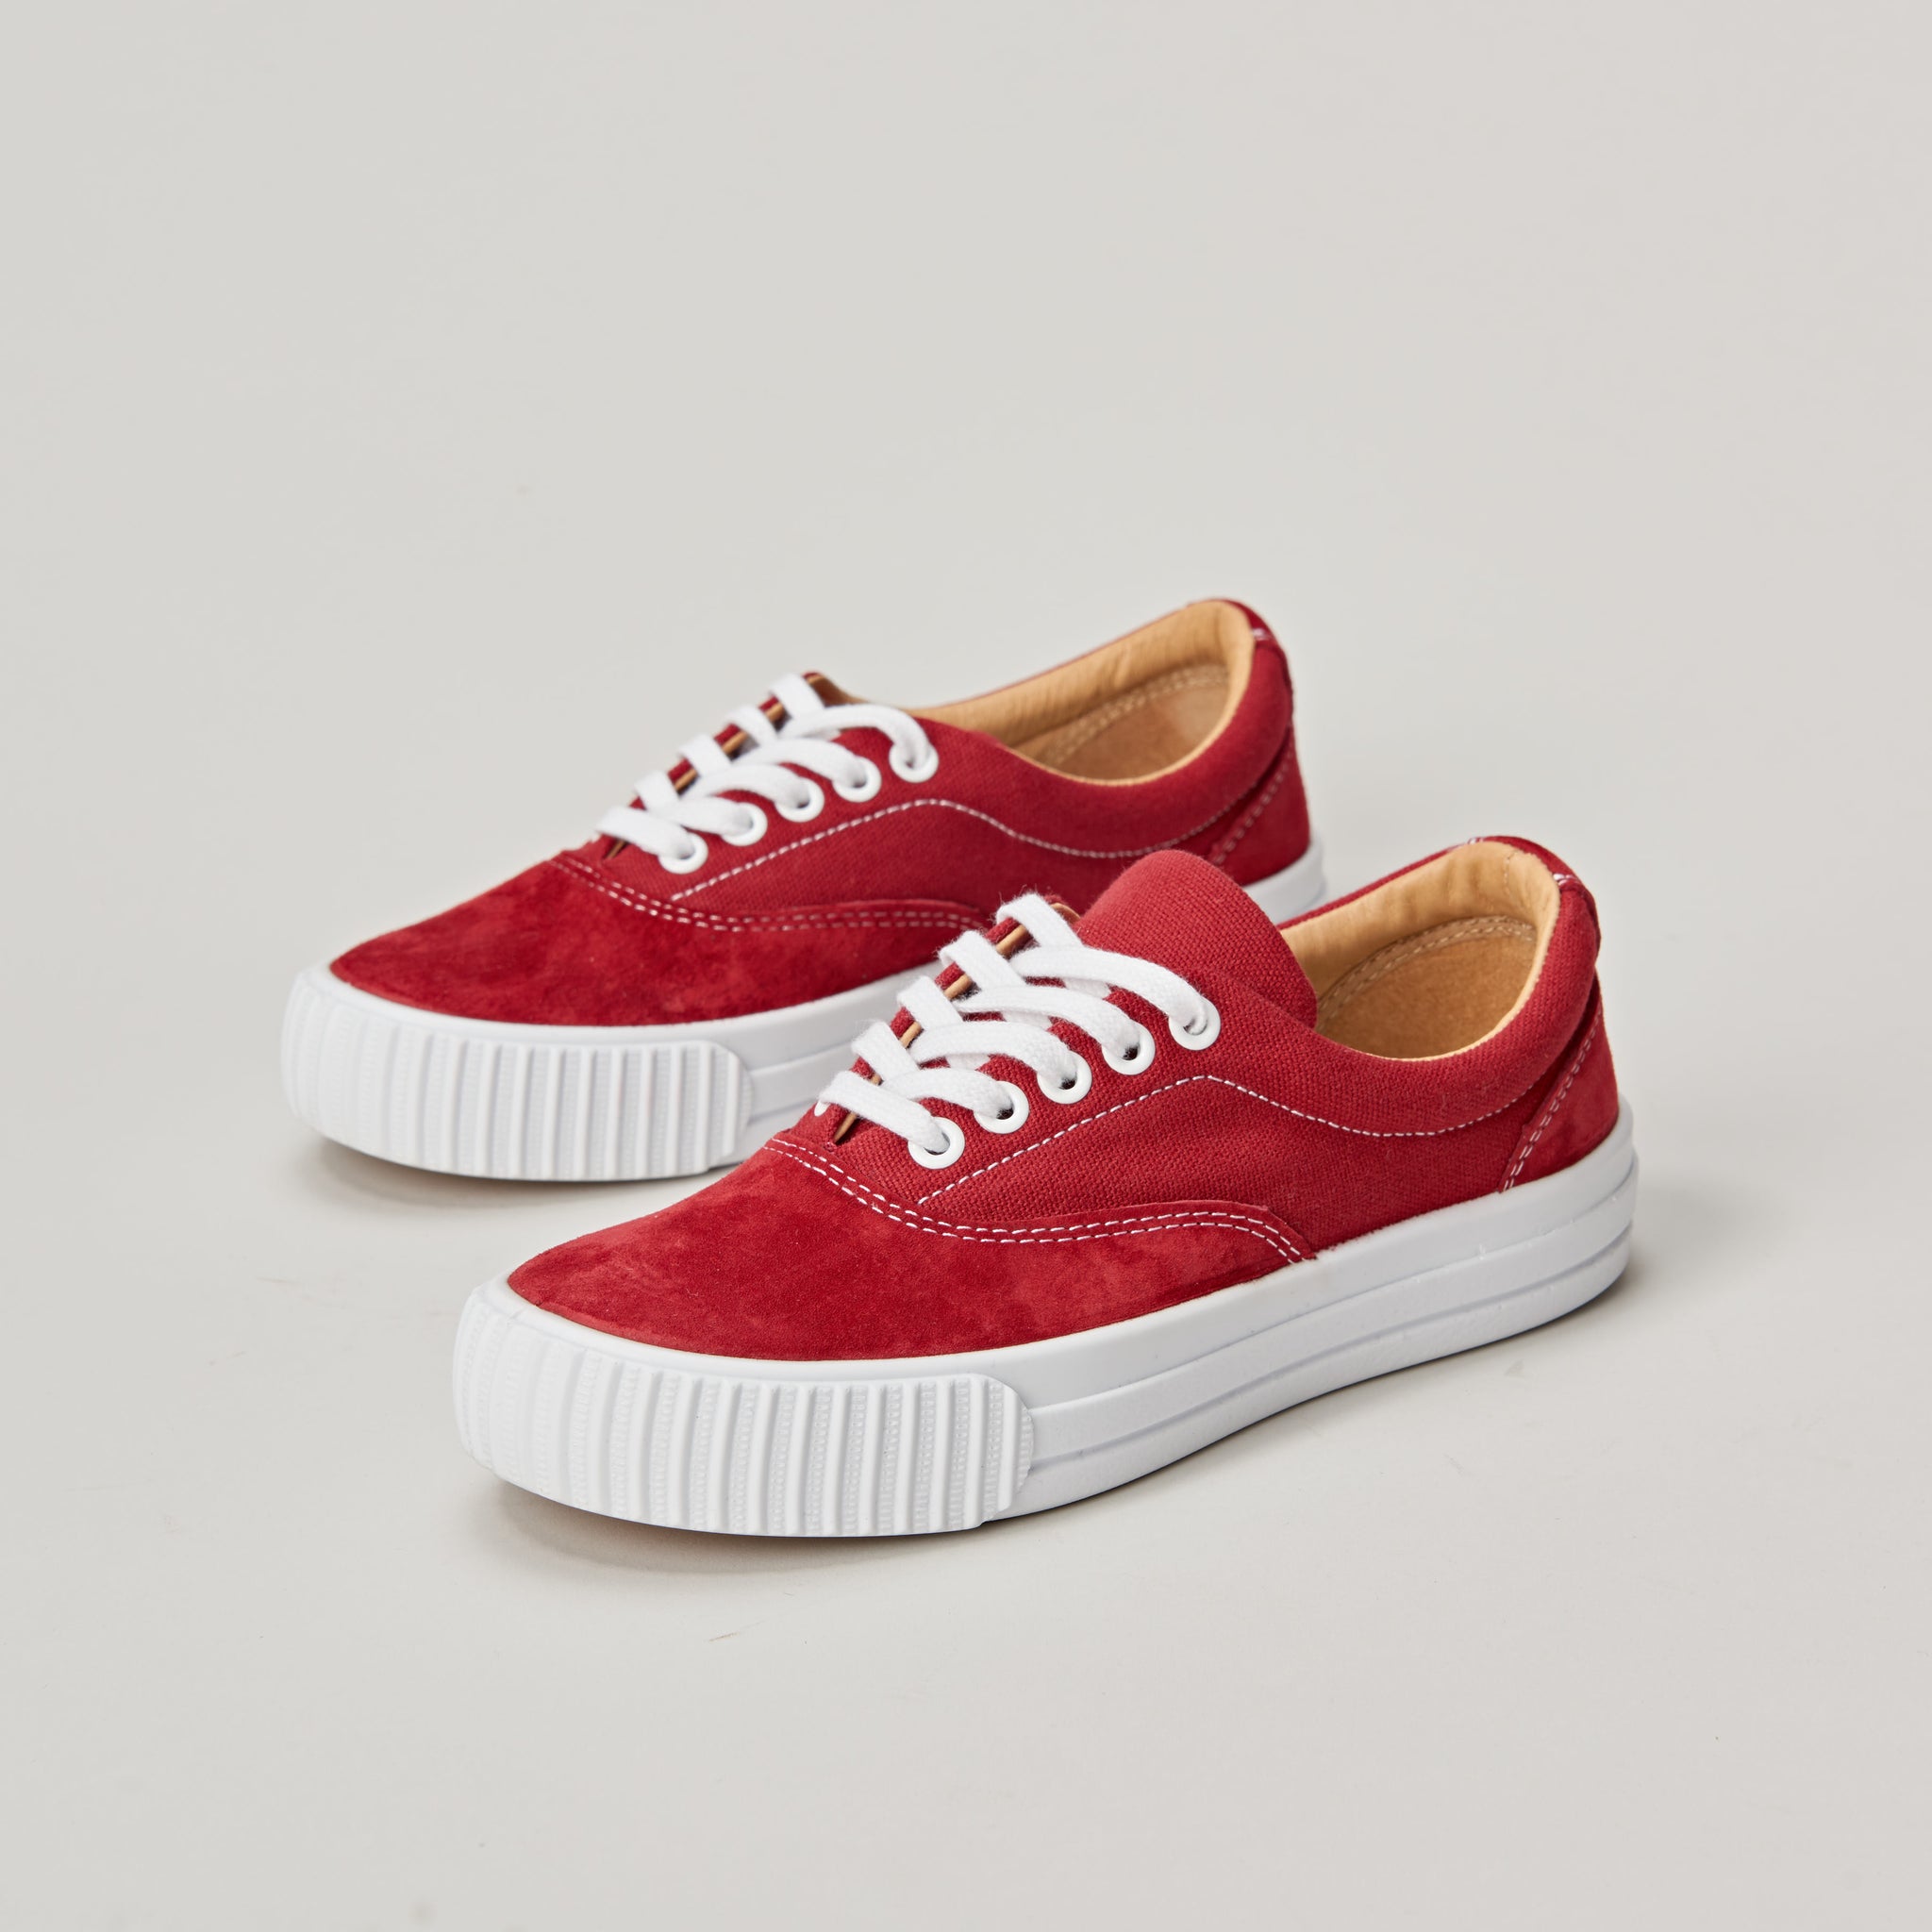 red pf flyers